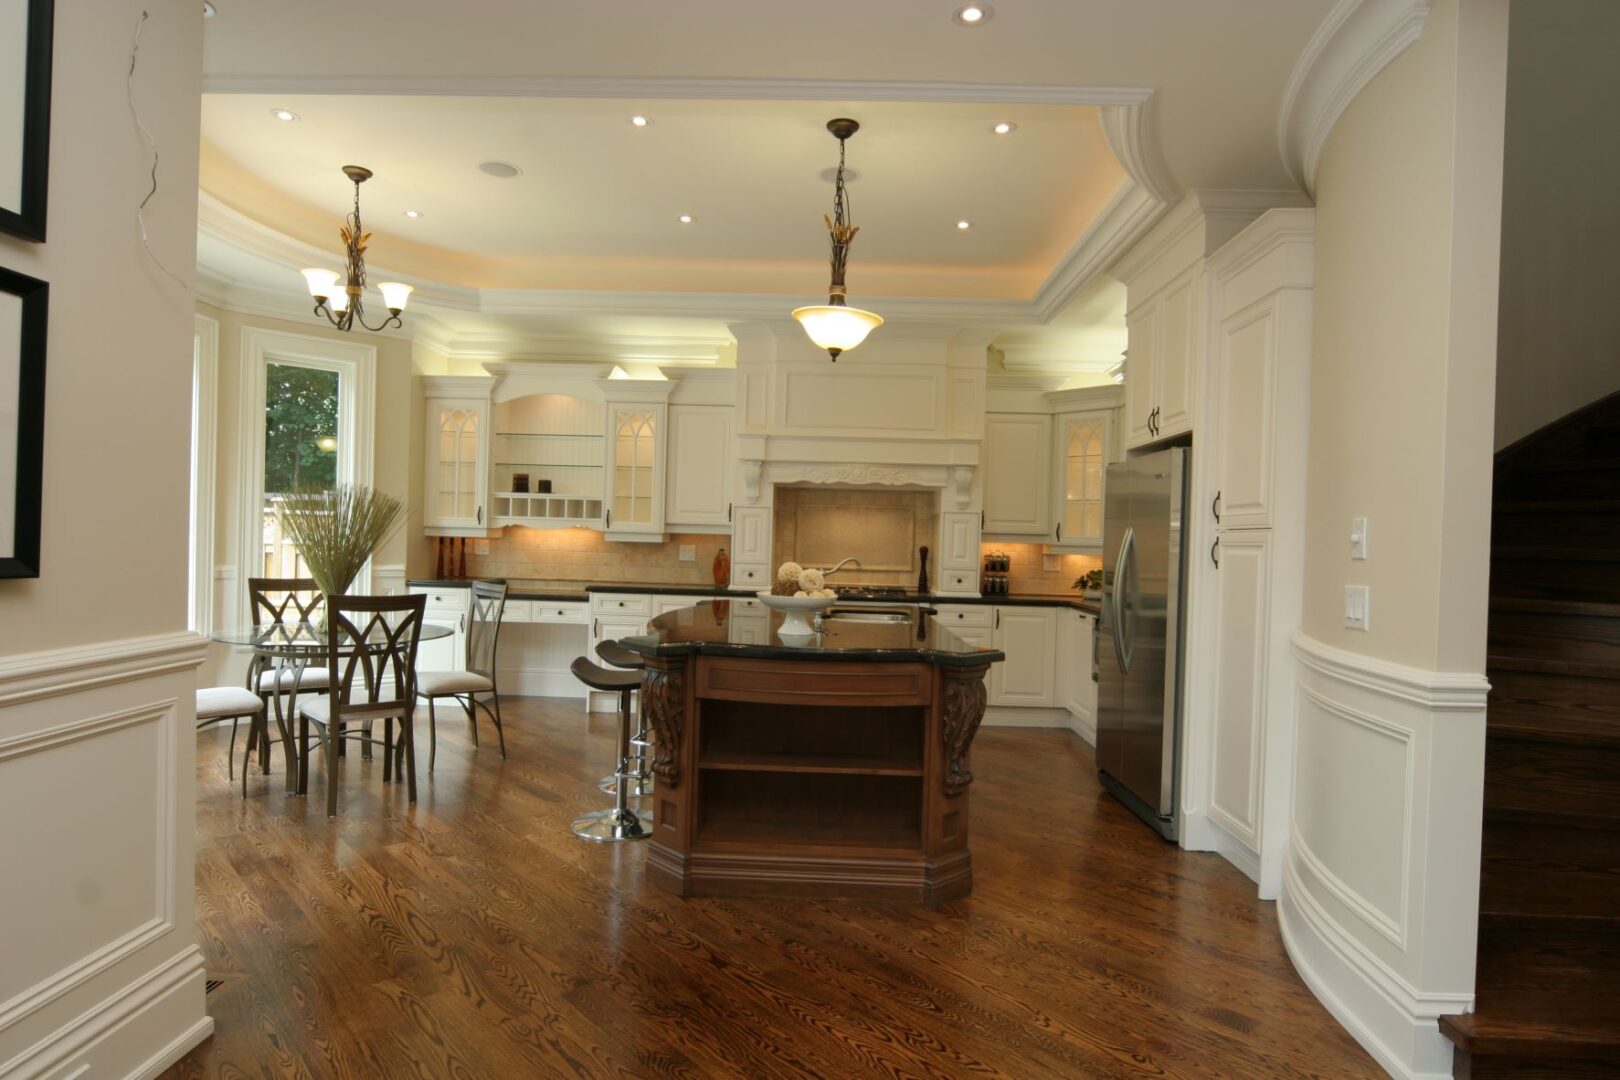 A Kitchen With an Island and White Archways